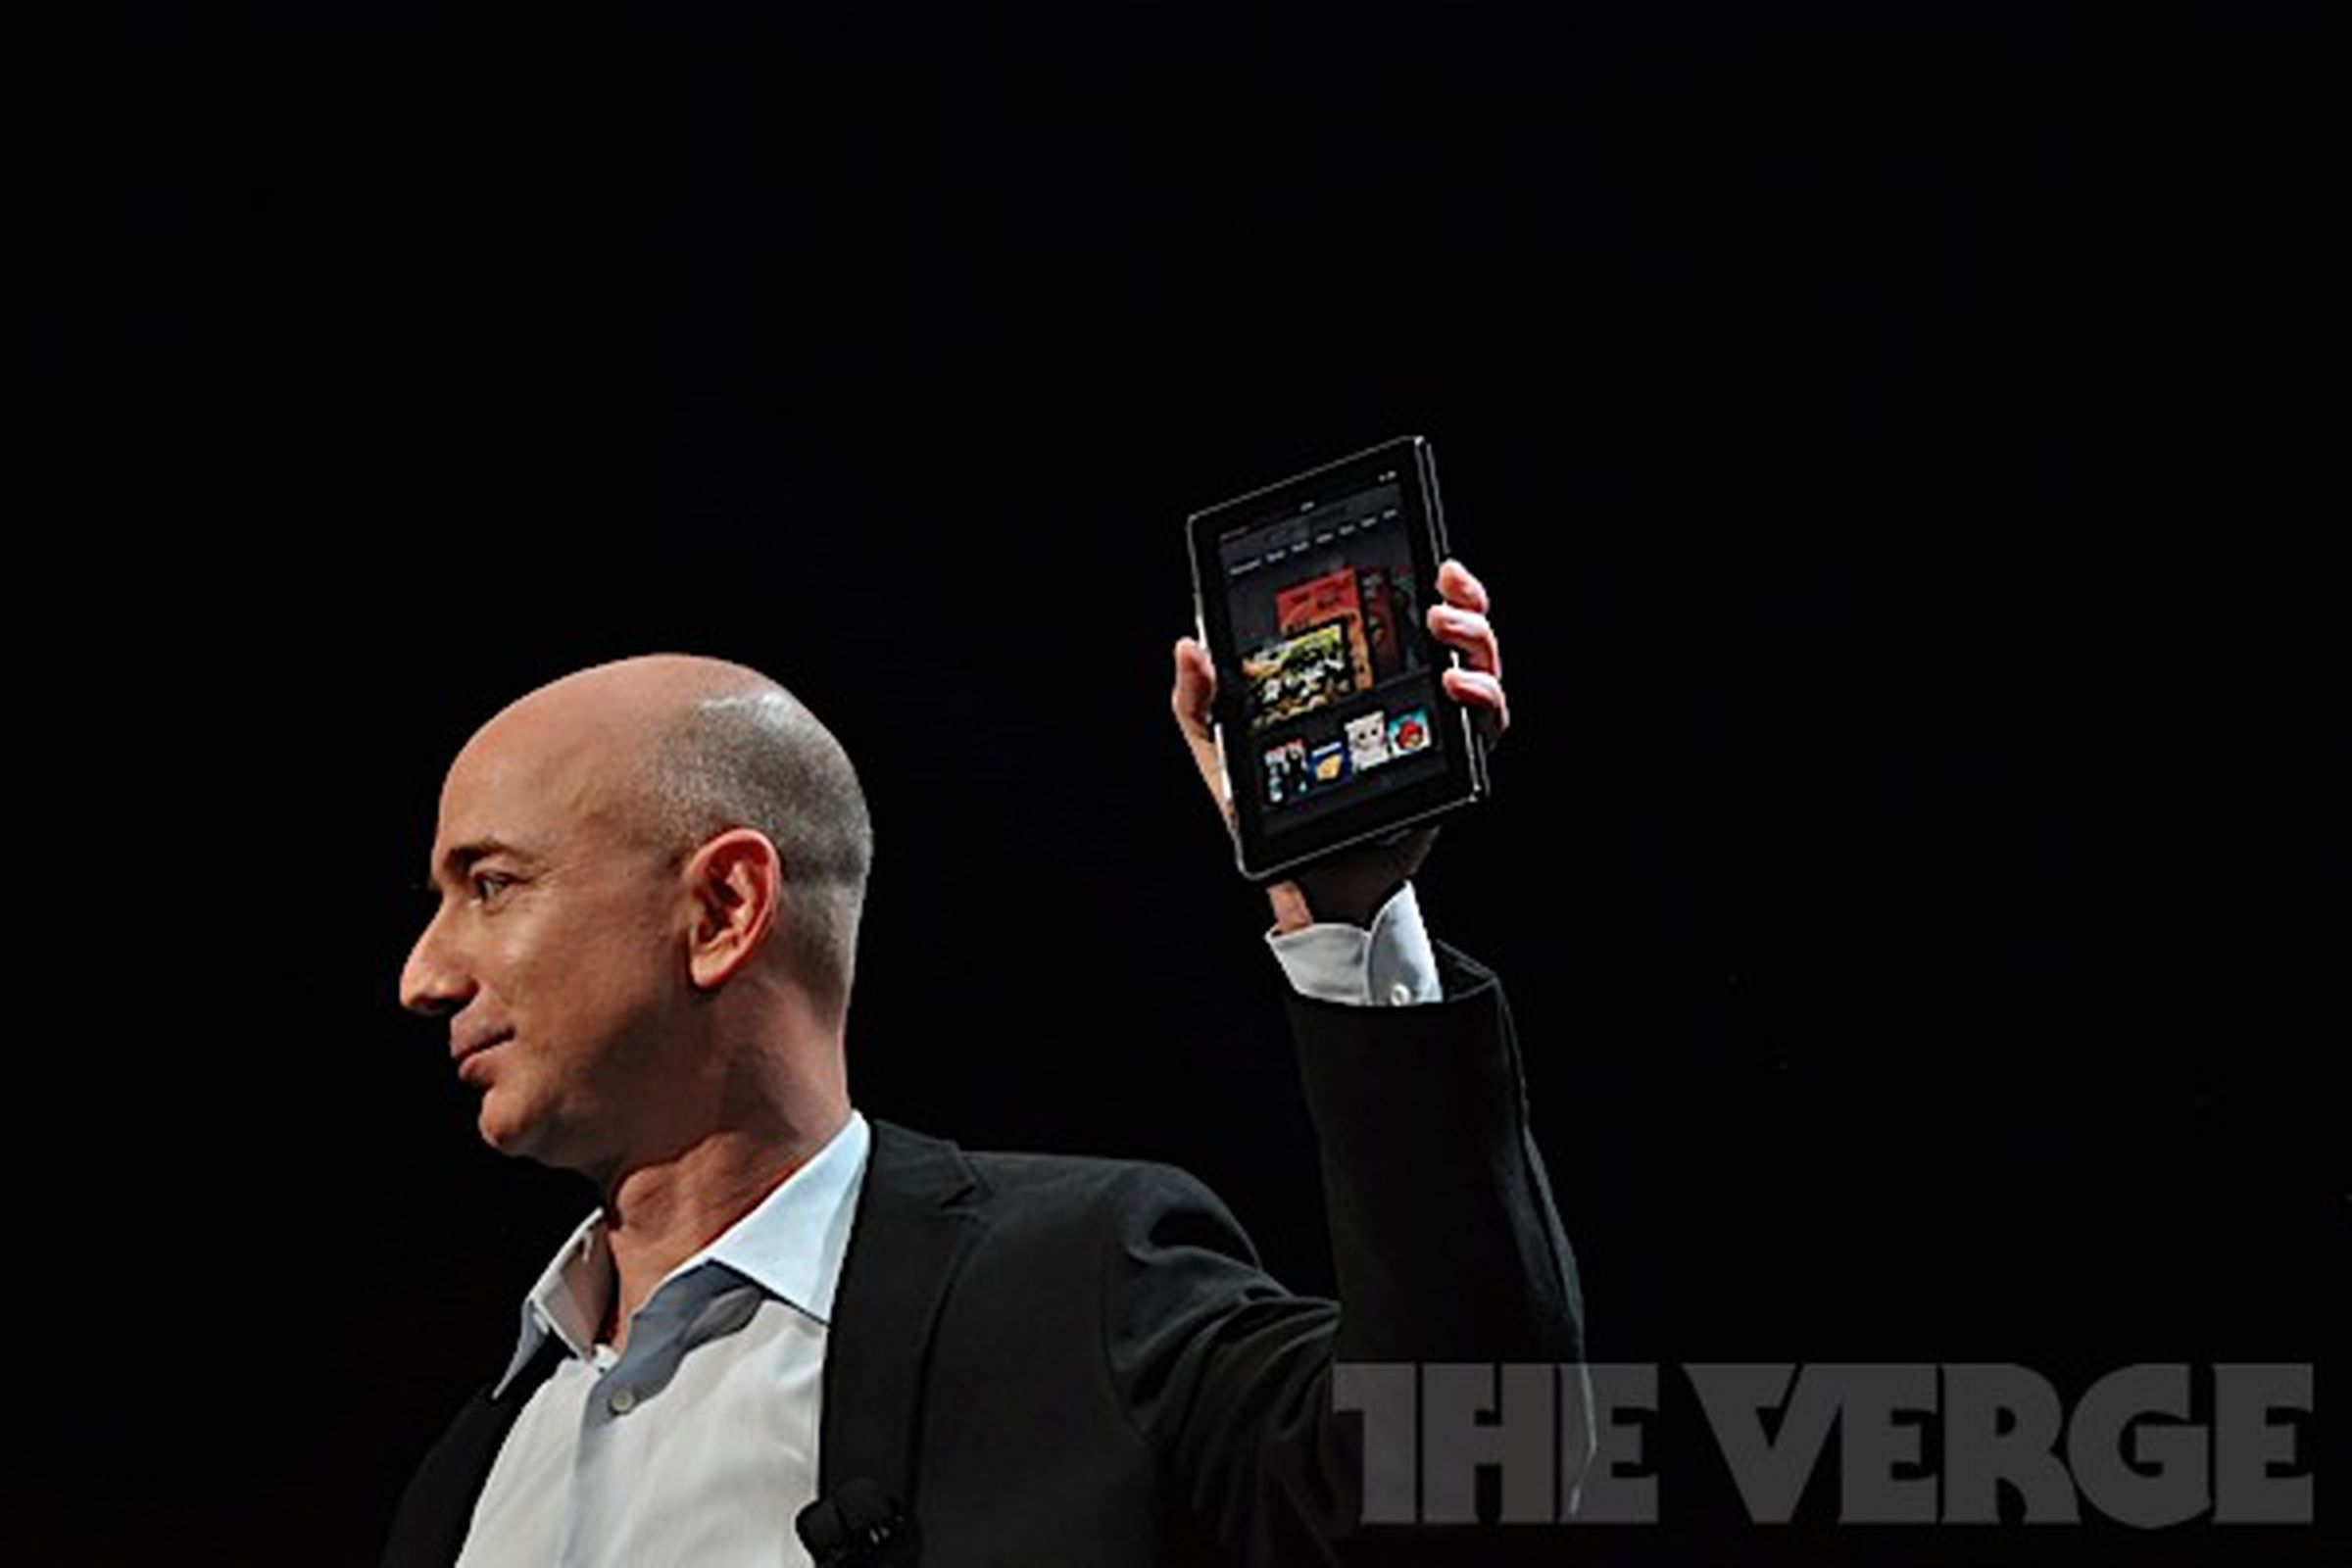 Jeff Bezos holding the Kindle Fire